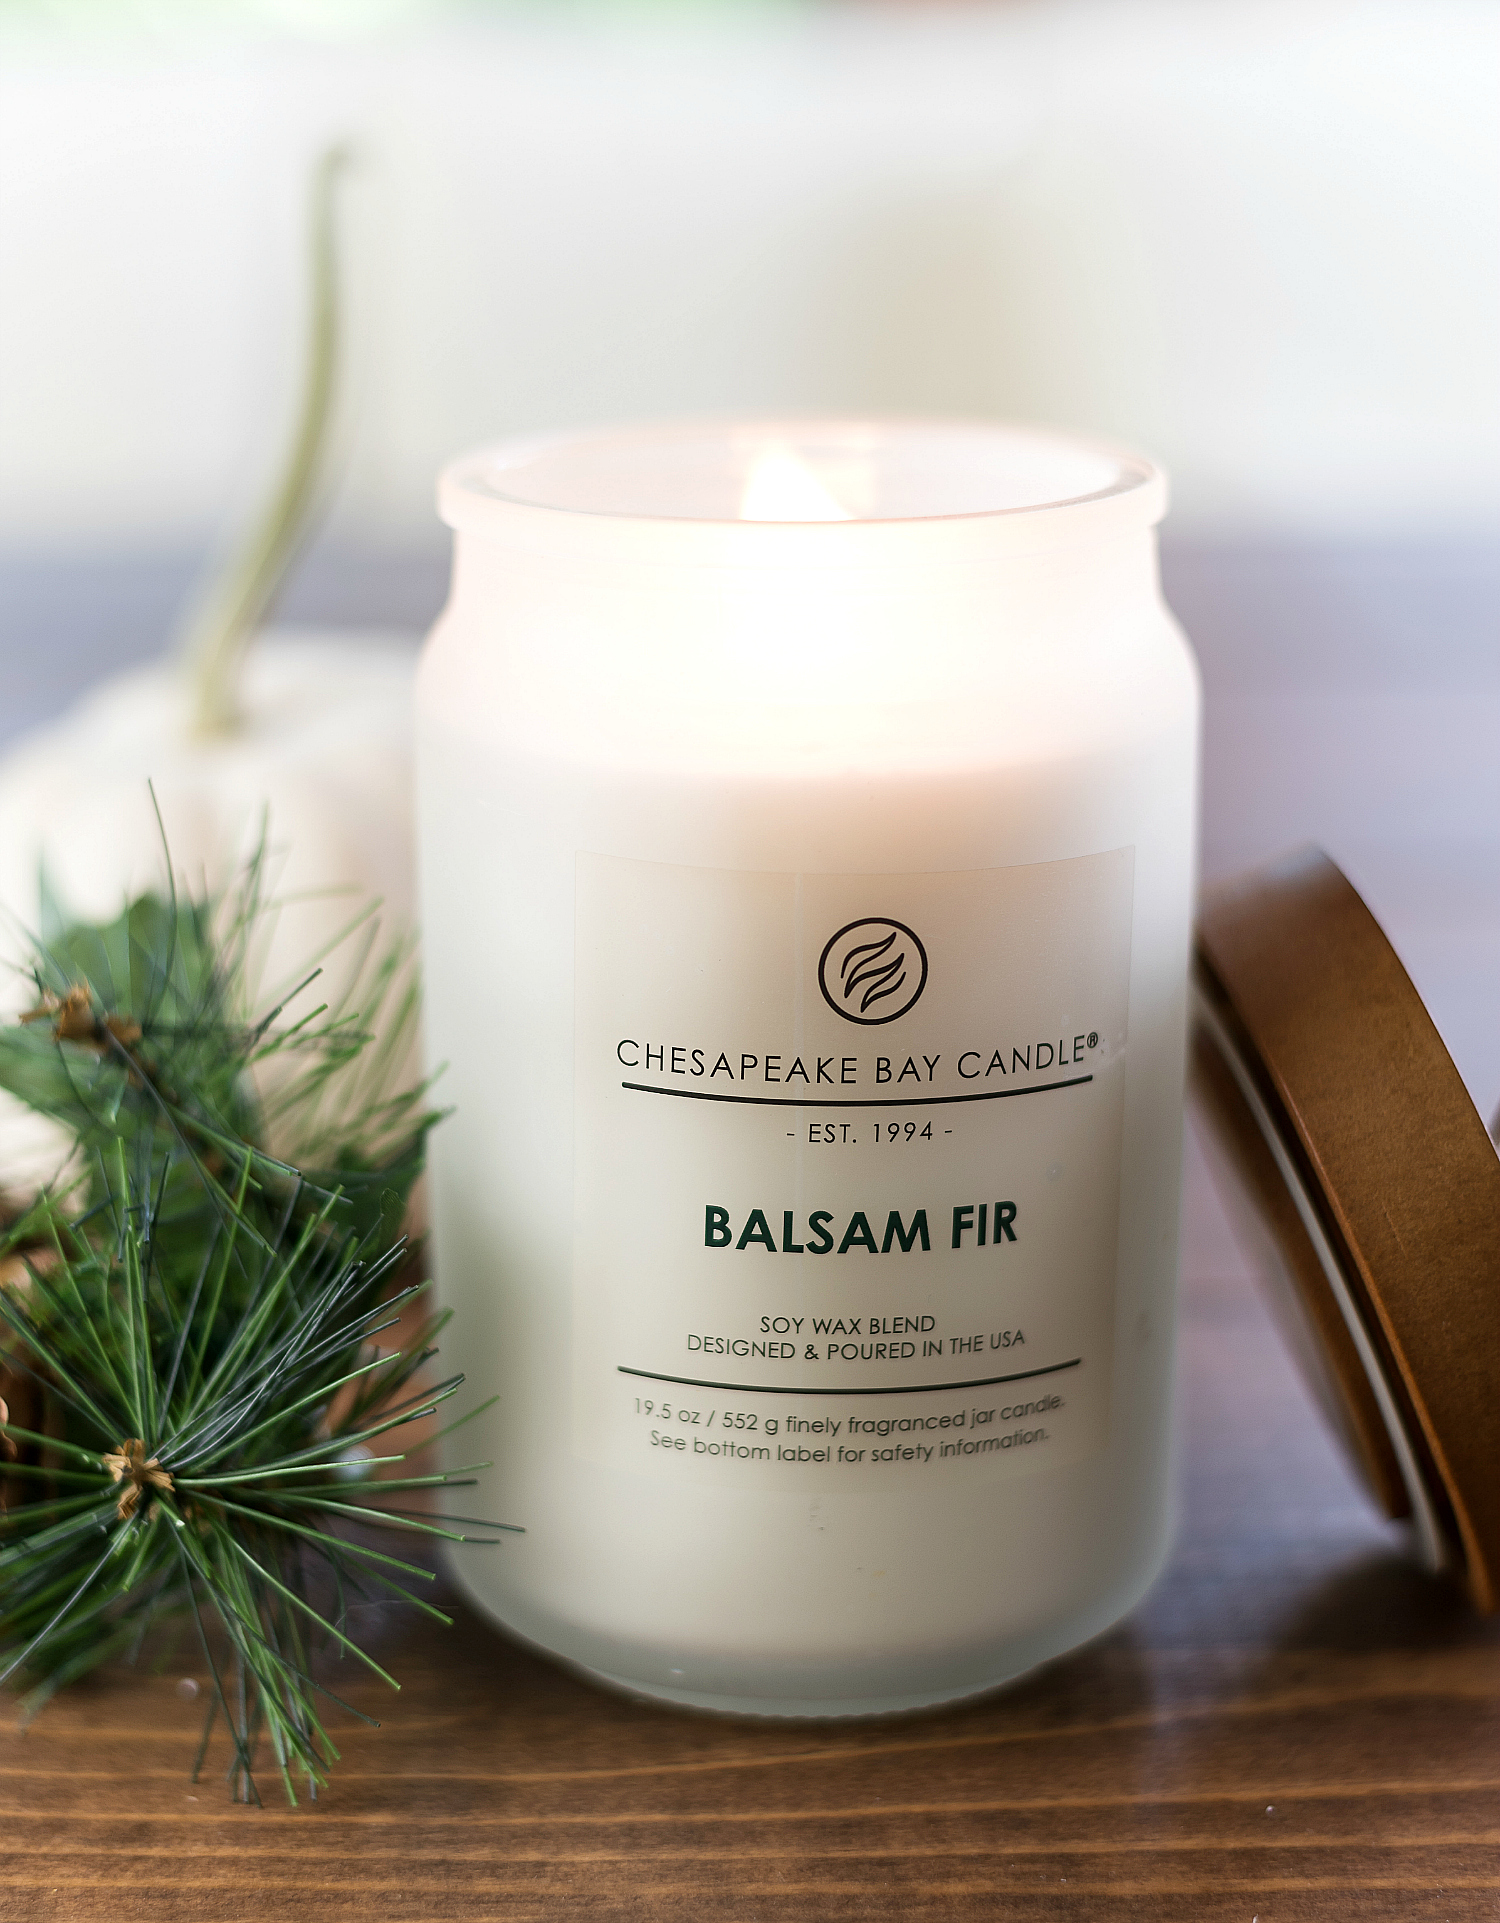 Chesapeake Bay Candle Heritage Collection Fall 2017